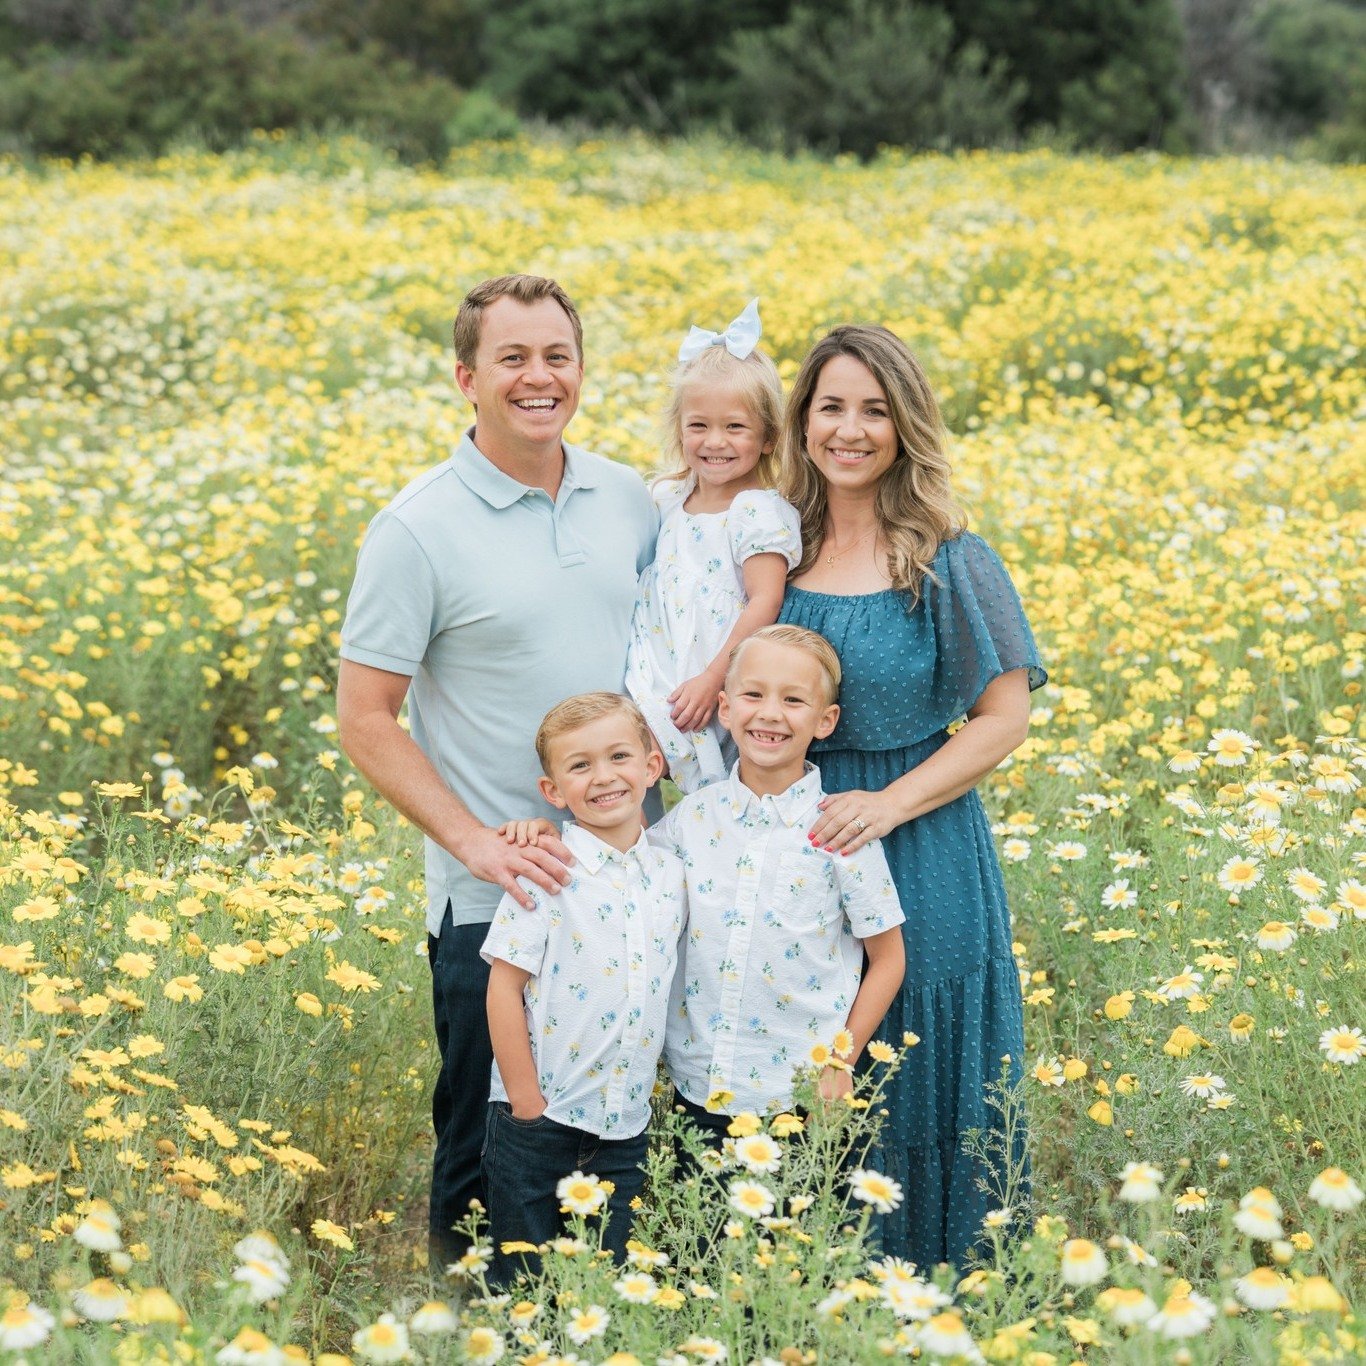 Mother's day is in just 8 days! The bloom waited for May! We have flower filled minis at just 200! Contact us now for all of May! Rush edit available for shoots this week!